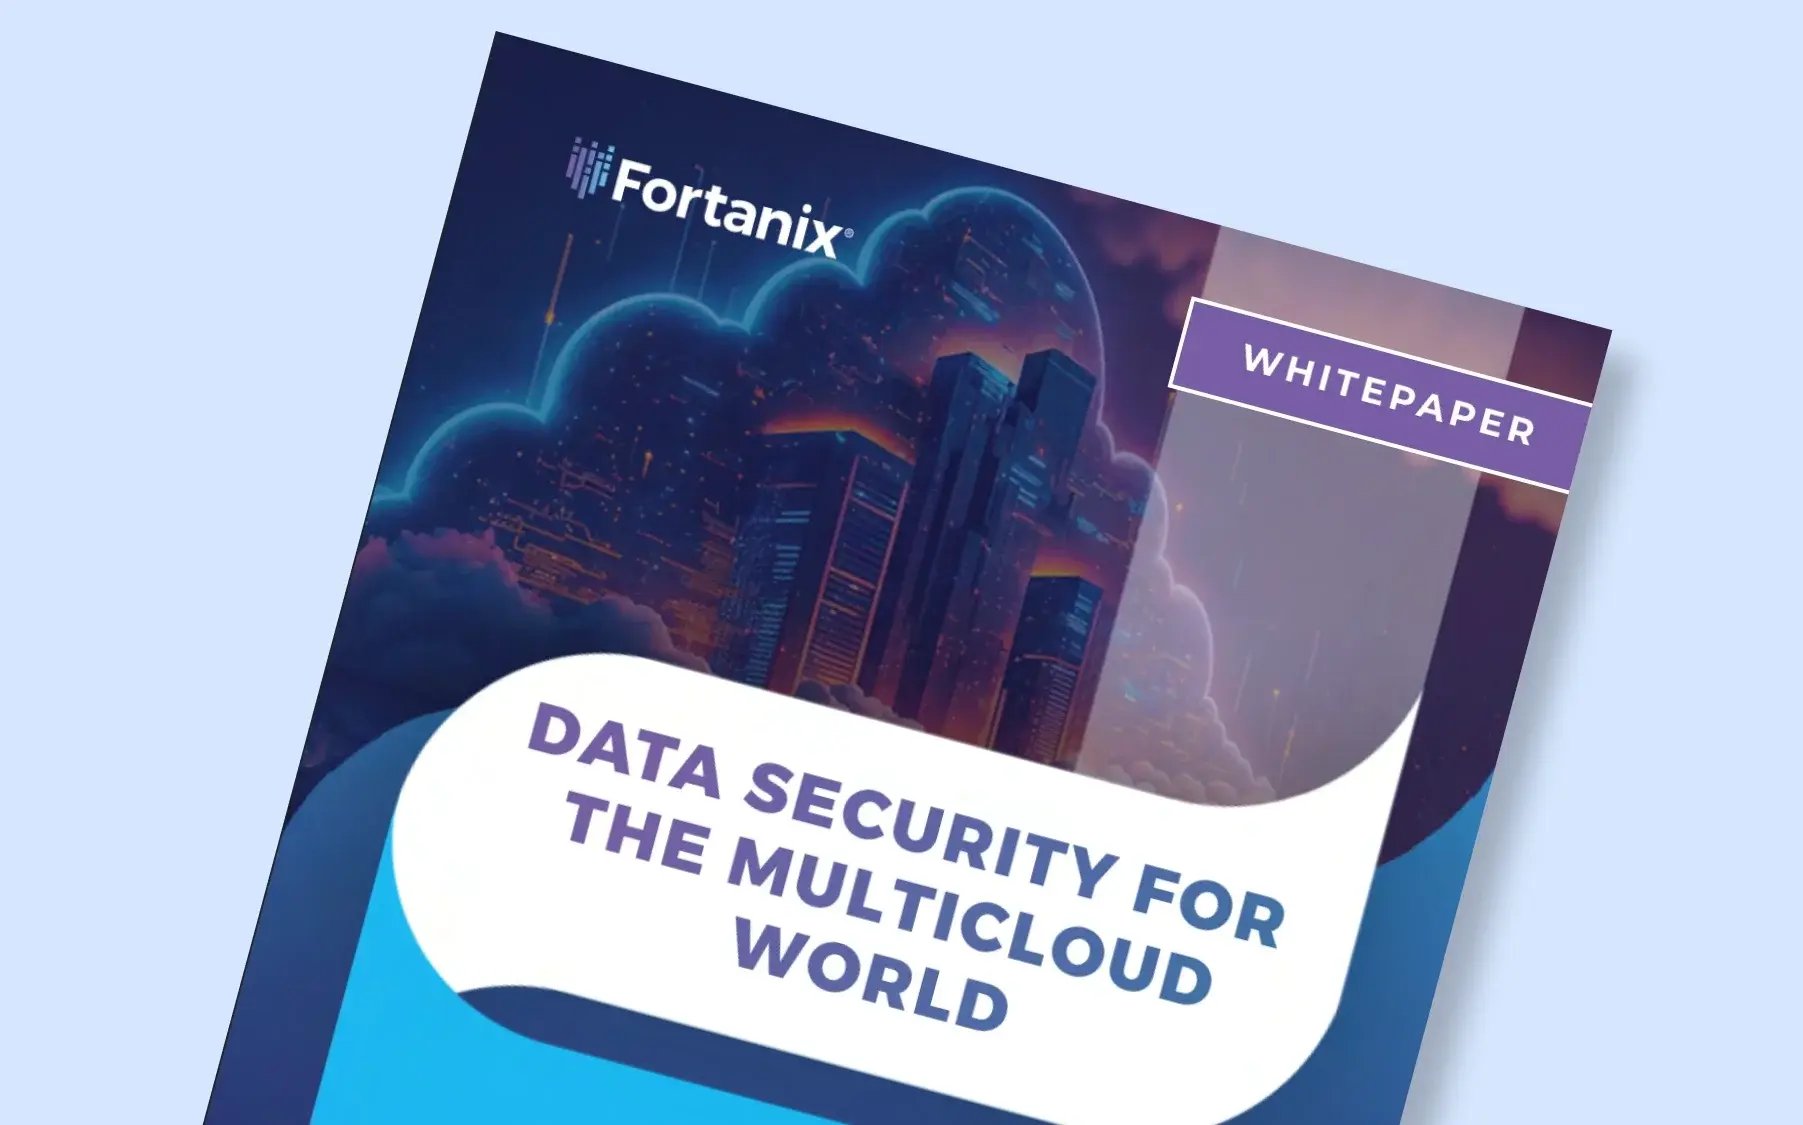 Data Security for the Multicloud World